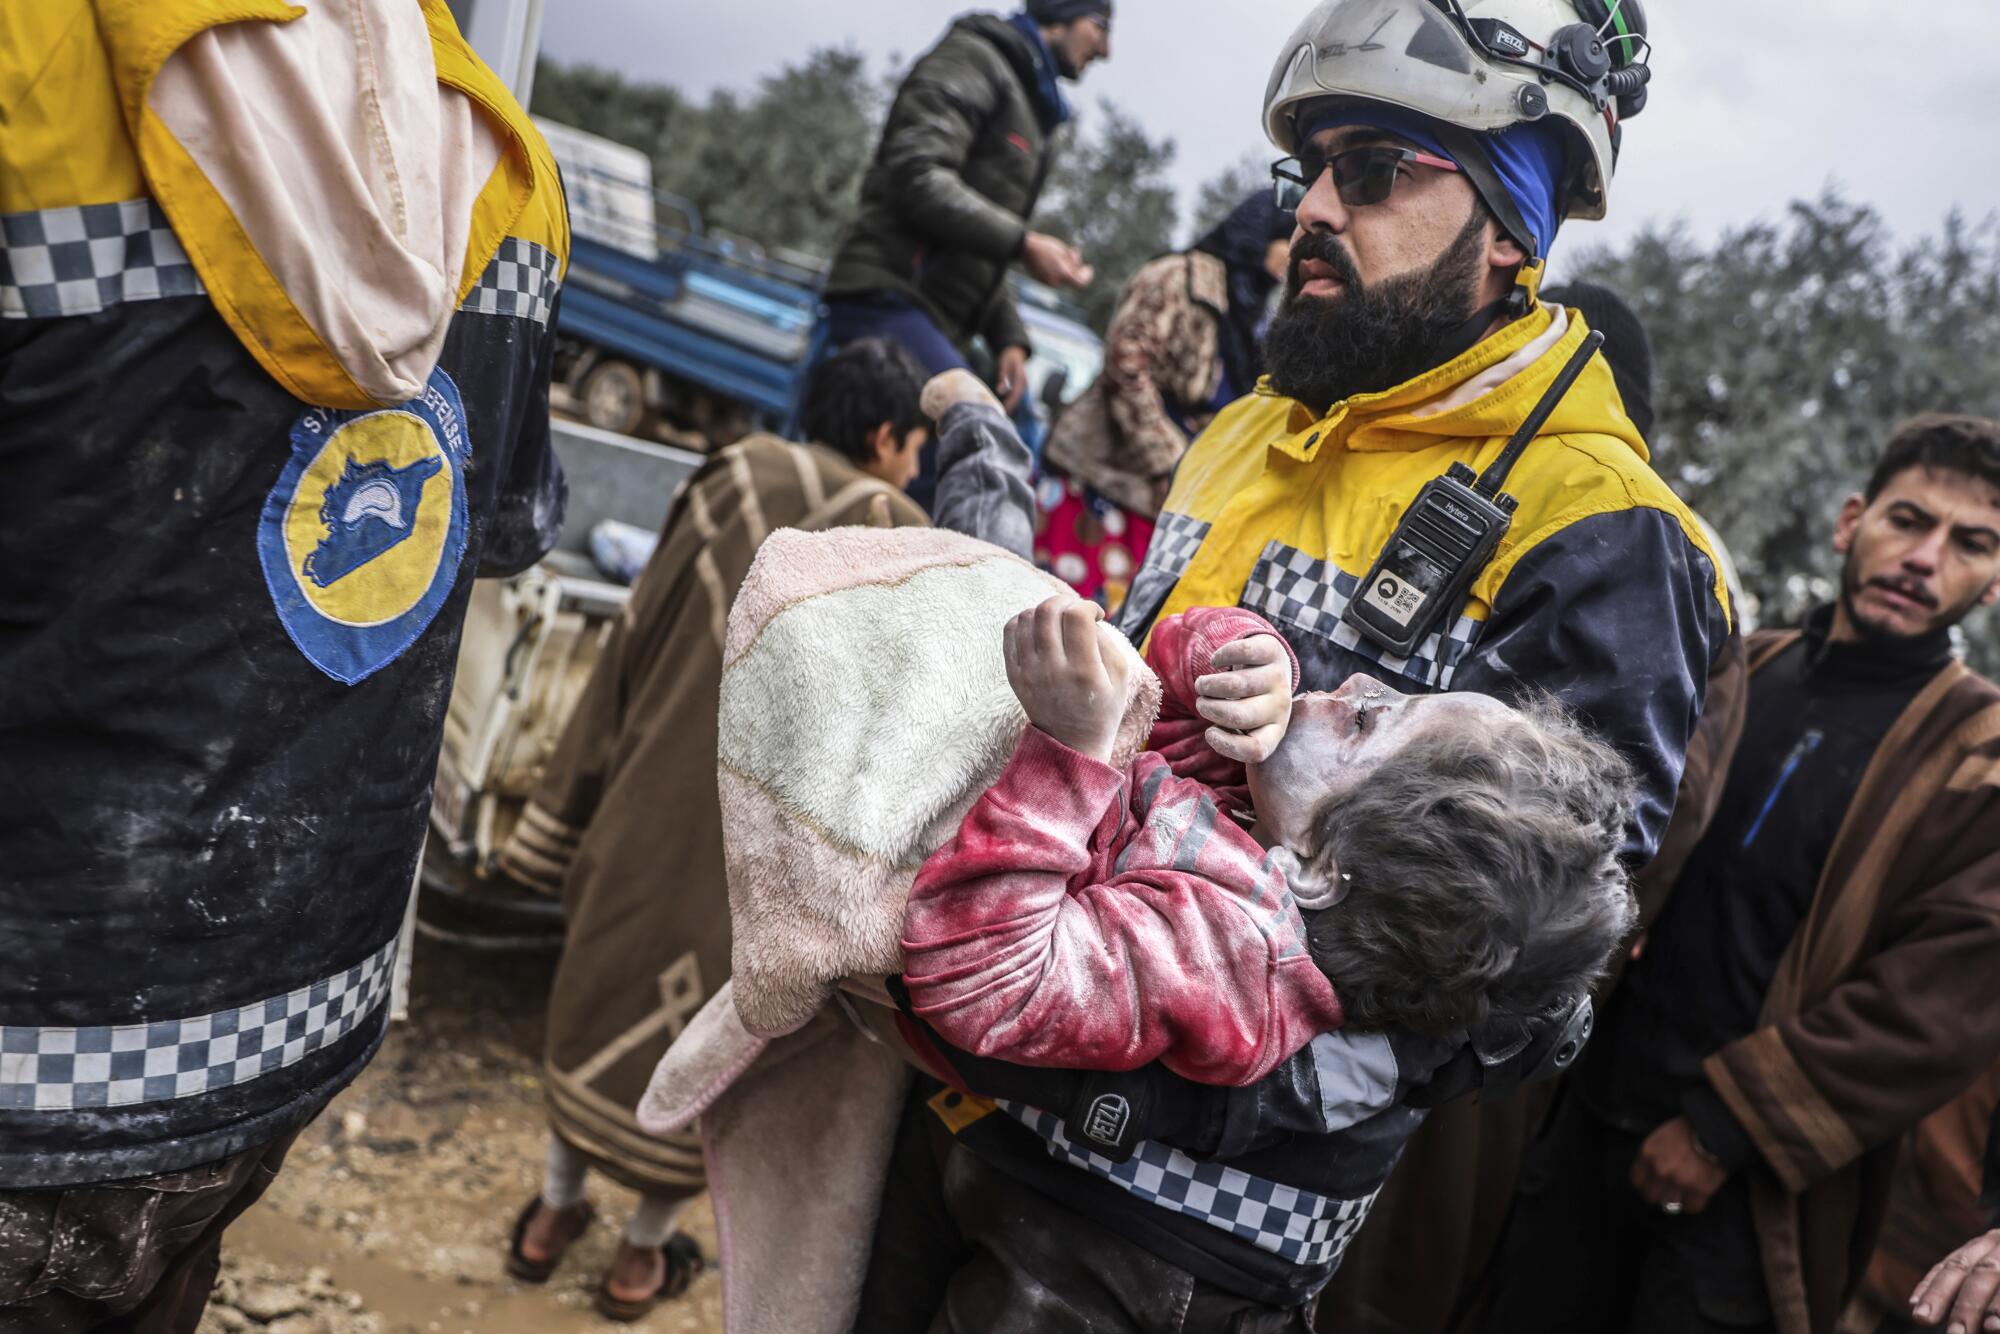 A man in rescue gear carries a dust-covered young girl in his arms